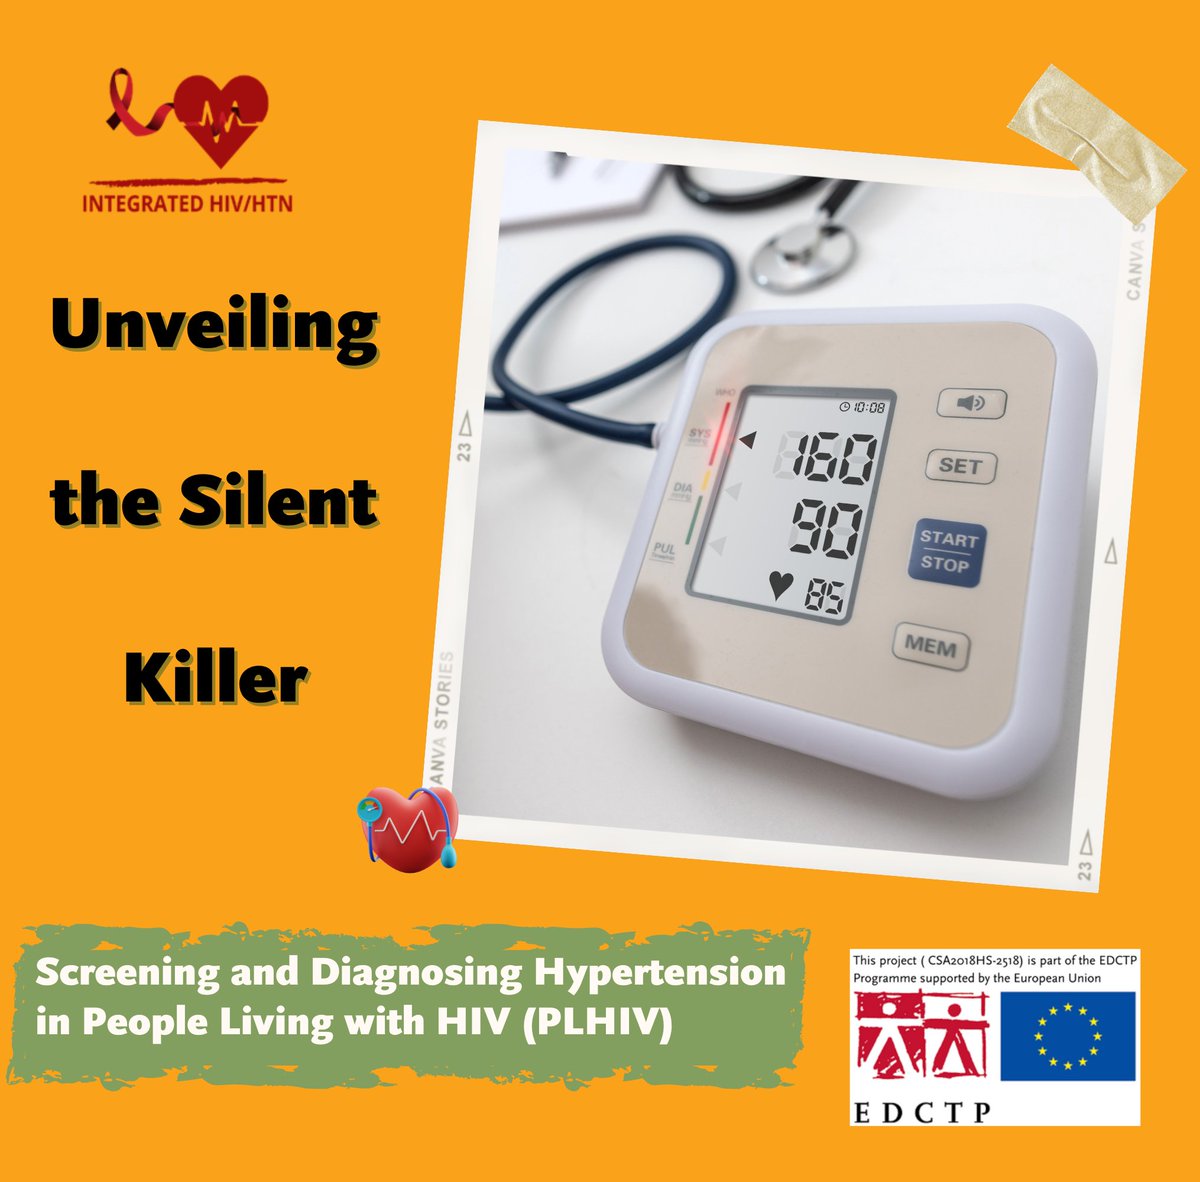 It's time to tackle the silent killer! Click the link to learn more about hypertension screening in the HIV community 👉integratedhivhtn.idrc-uganda.org/Unveiling%20th… #HealthisWealth #hypertension #PLHIV